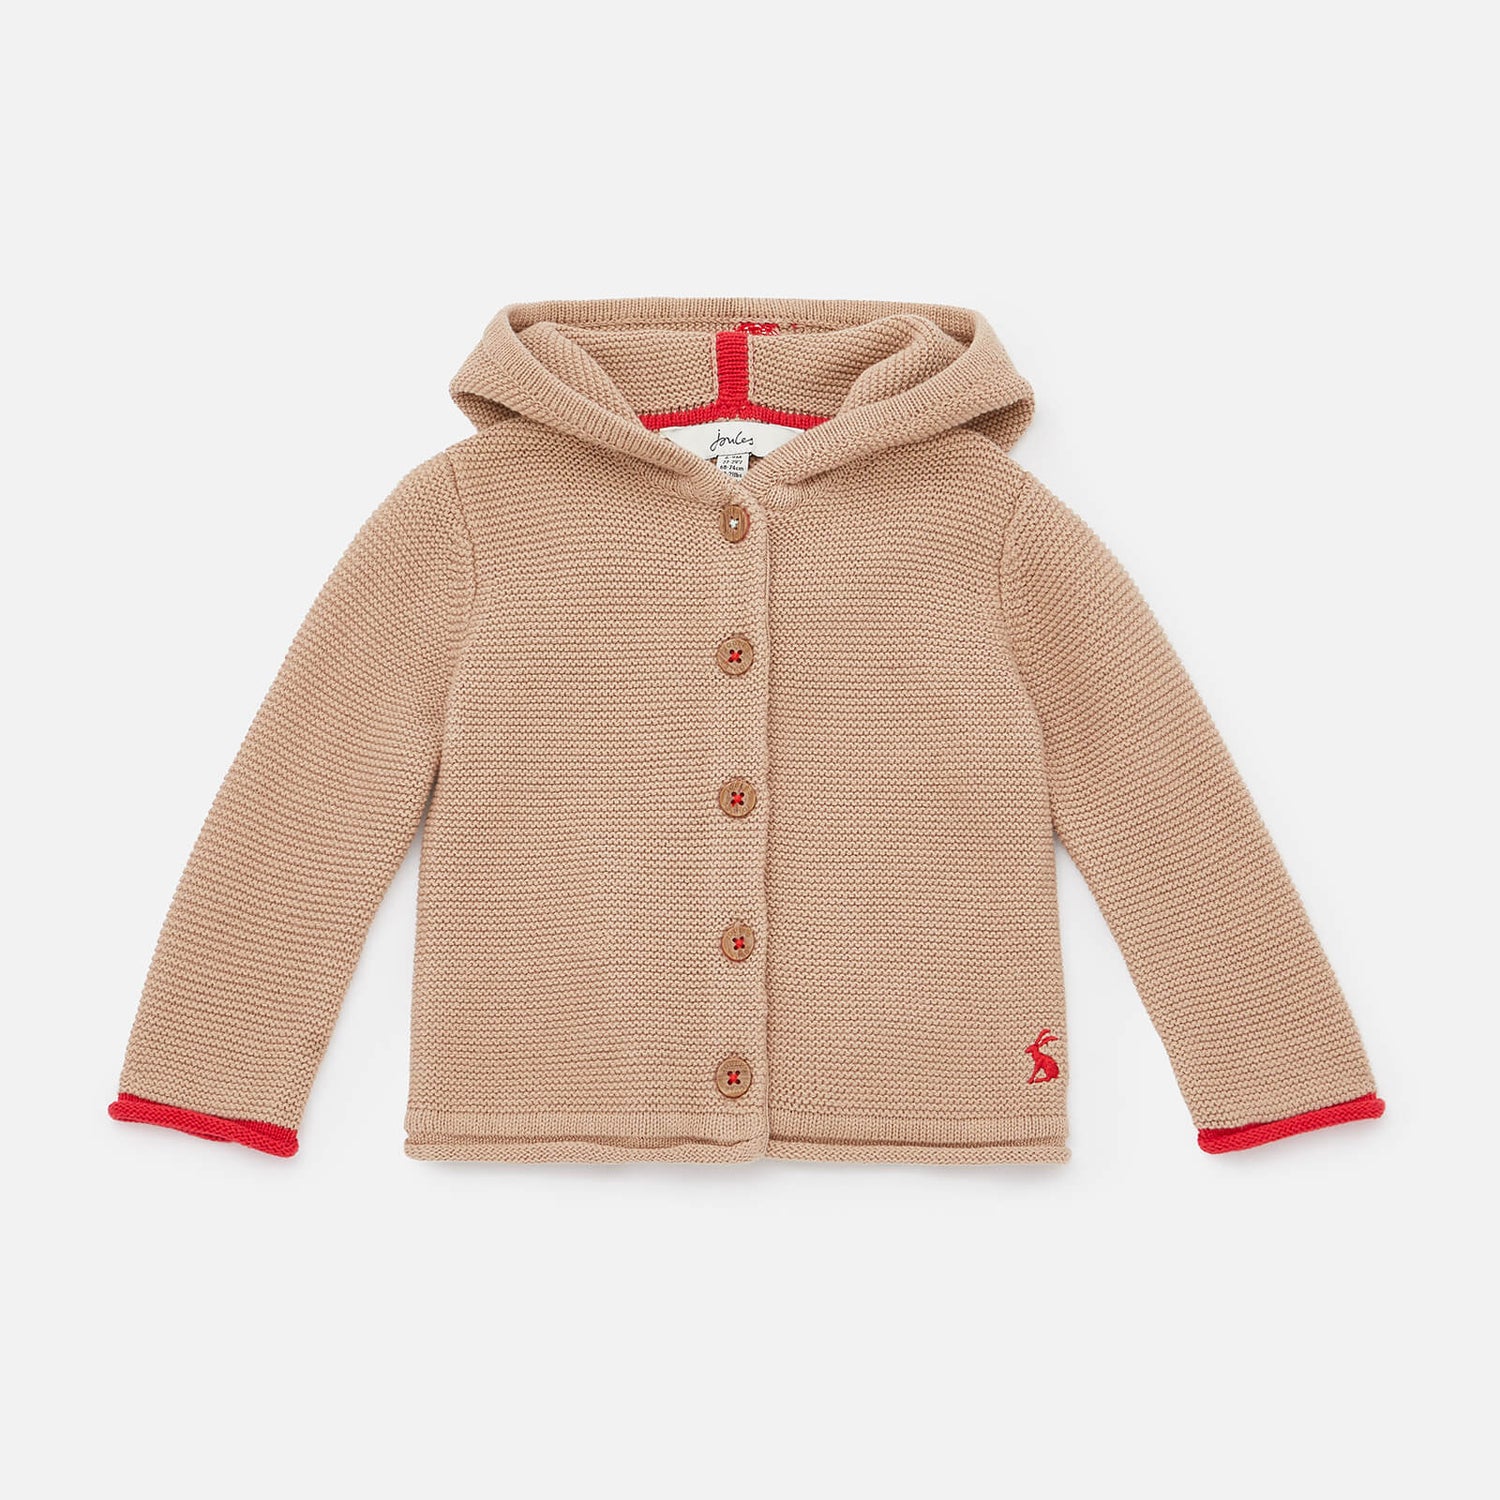 Joules Babies Alby Hooded Cardigan - 3-6 months